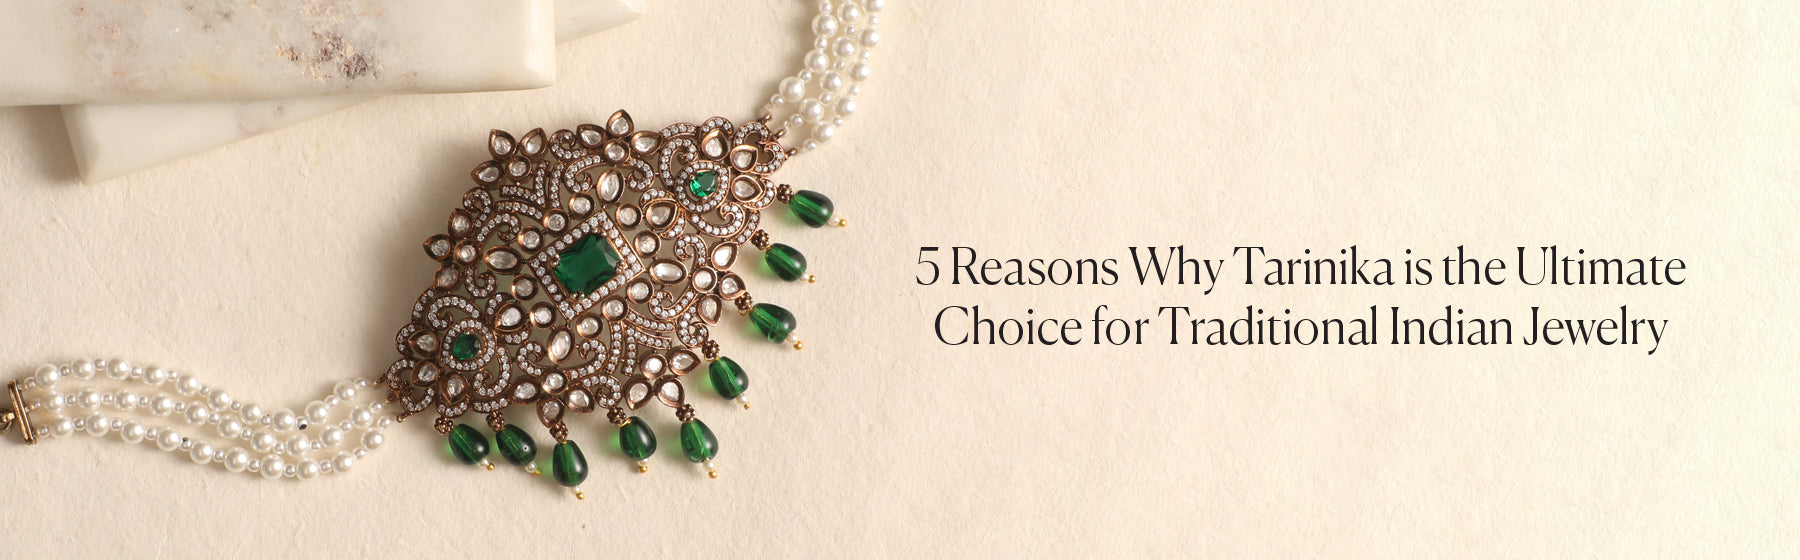 5 Reasons Why Tarinika is the Ultimate Choice for Traditional Indian Jewelry 